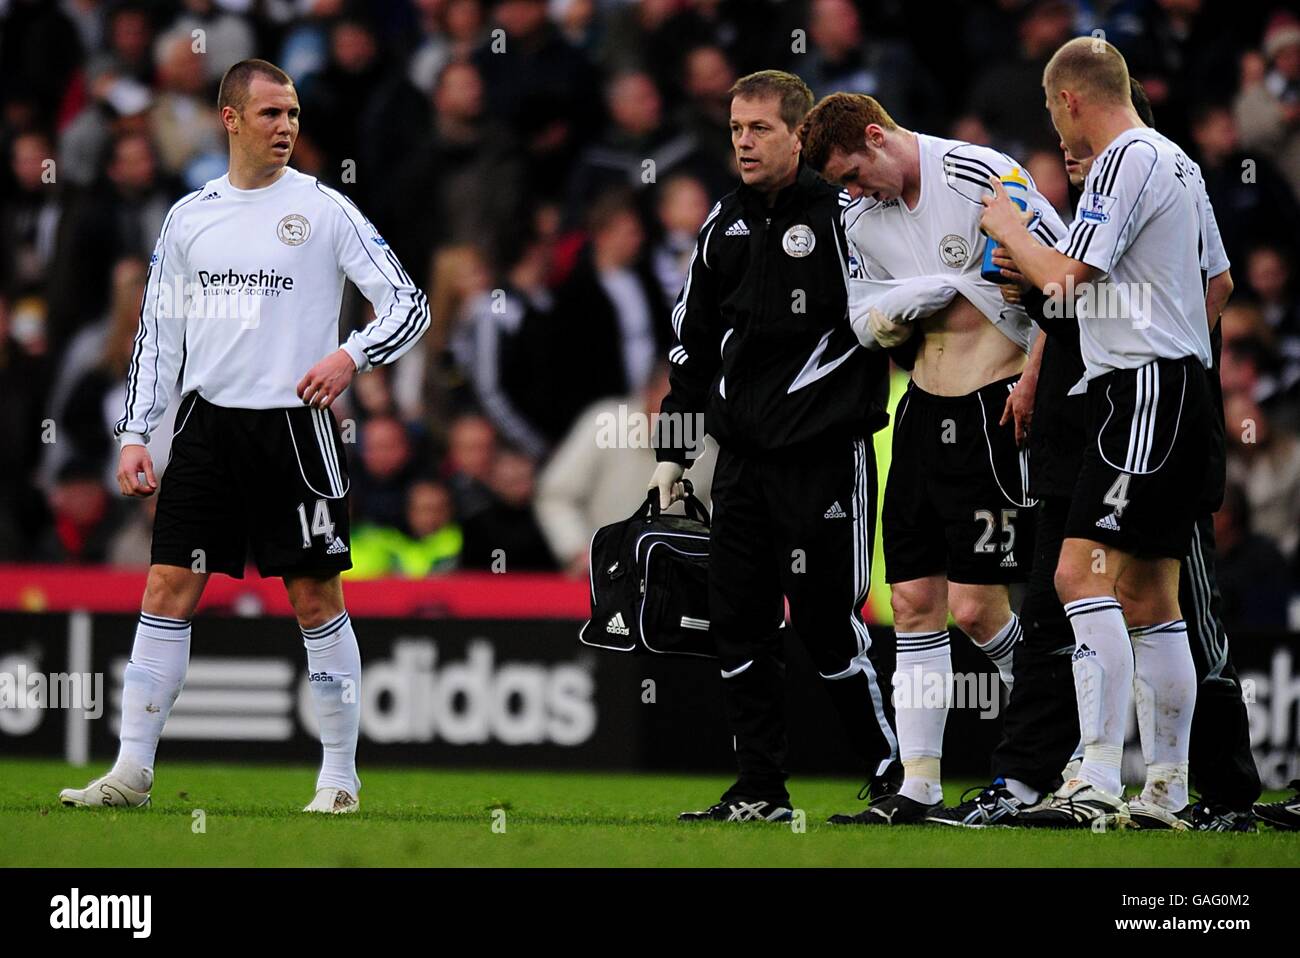 Soccer - Barclays Premier League - Derby County v Liverpool - Pride Park. Derby County's Stephen Pearson is taken off with a shoulder injury Stock Photo